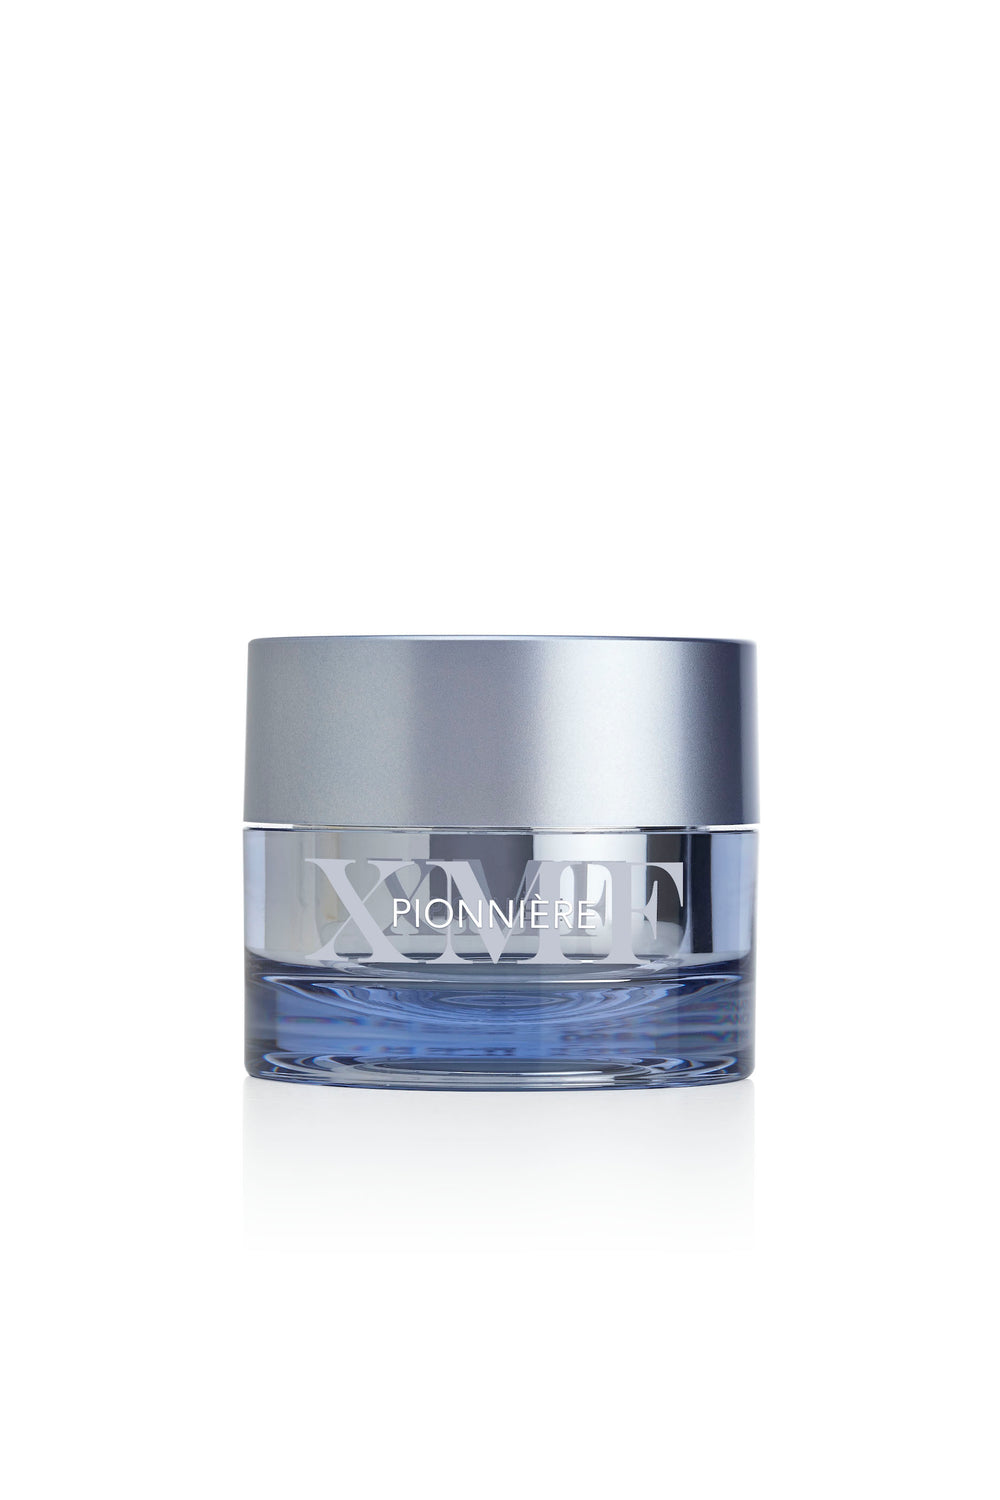 PIONNIERE XMF - Perfection Youth Cream - 50ml